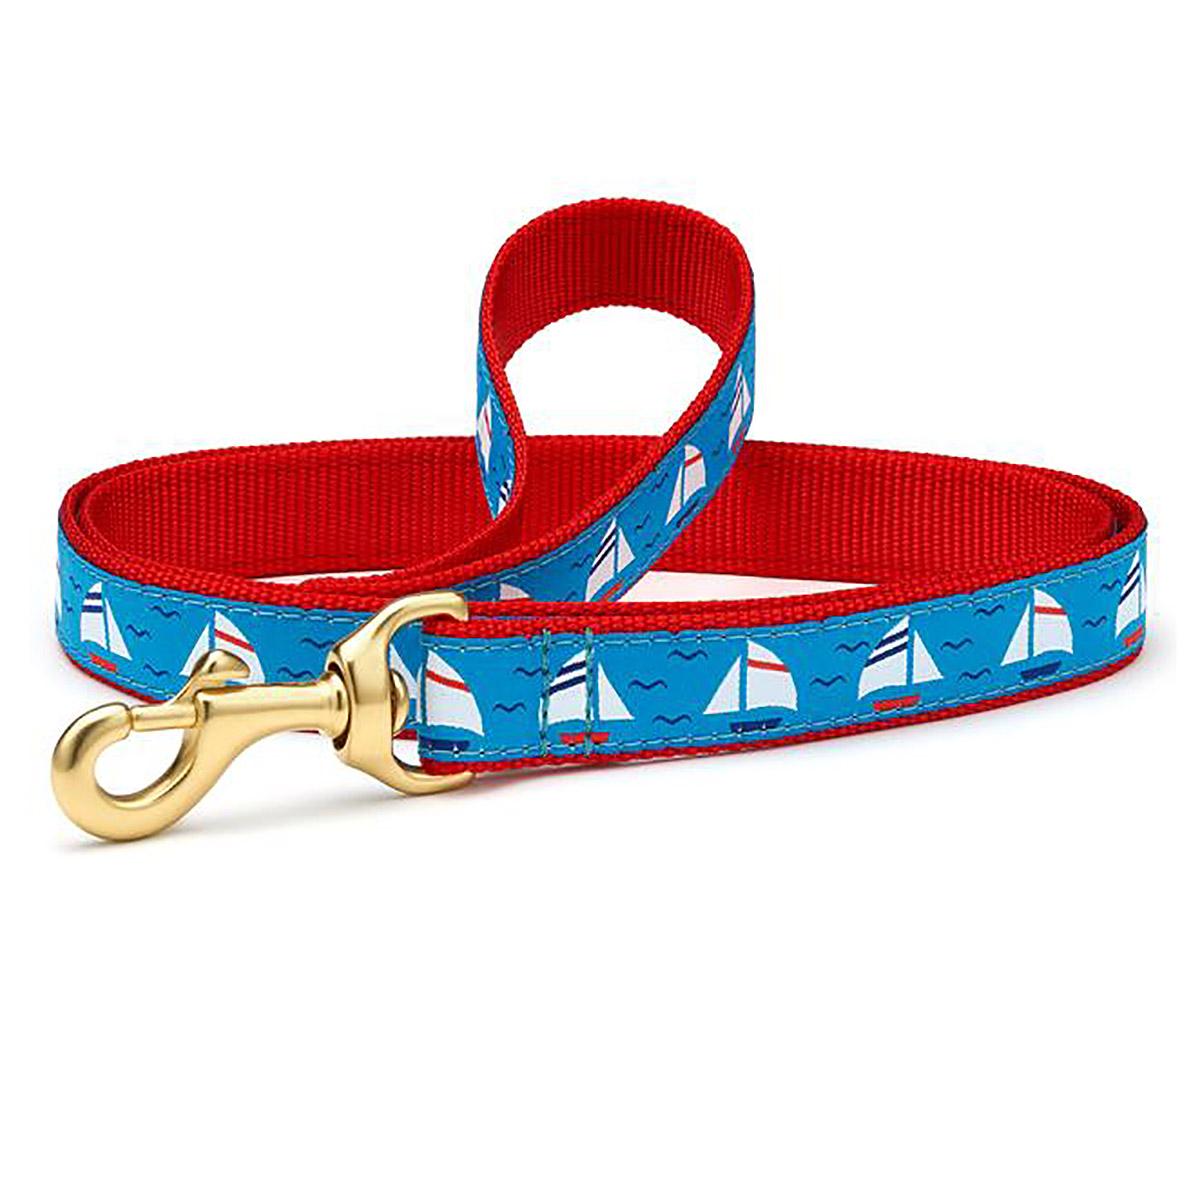 Under Sail Dog Leash by Up Country